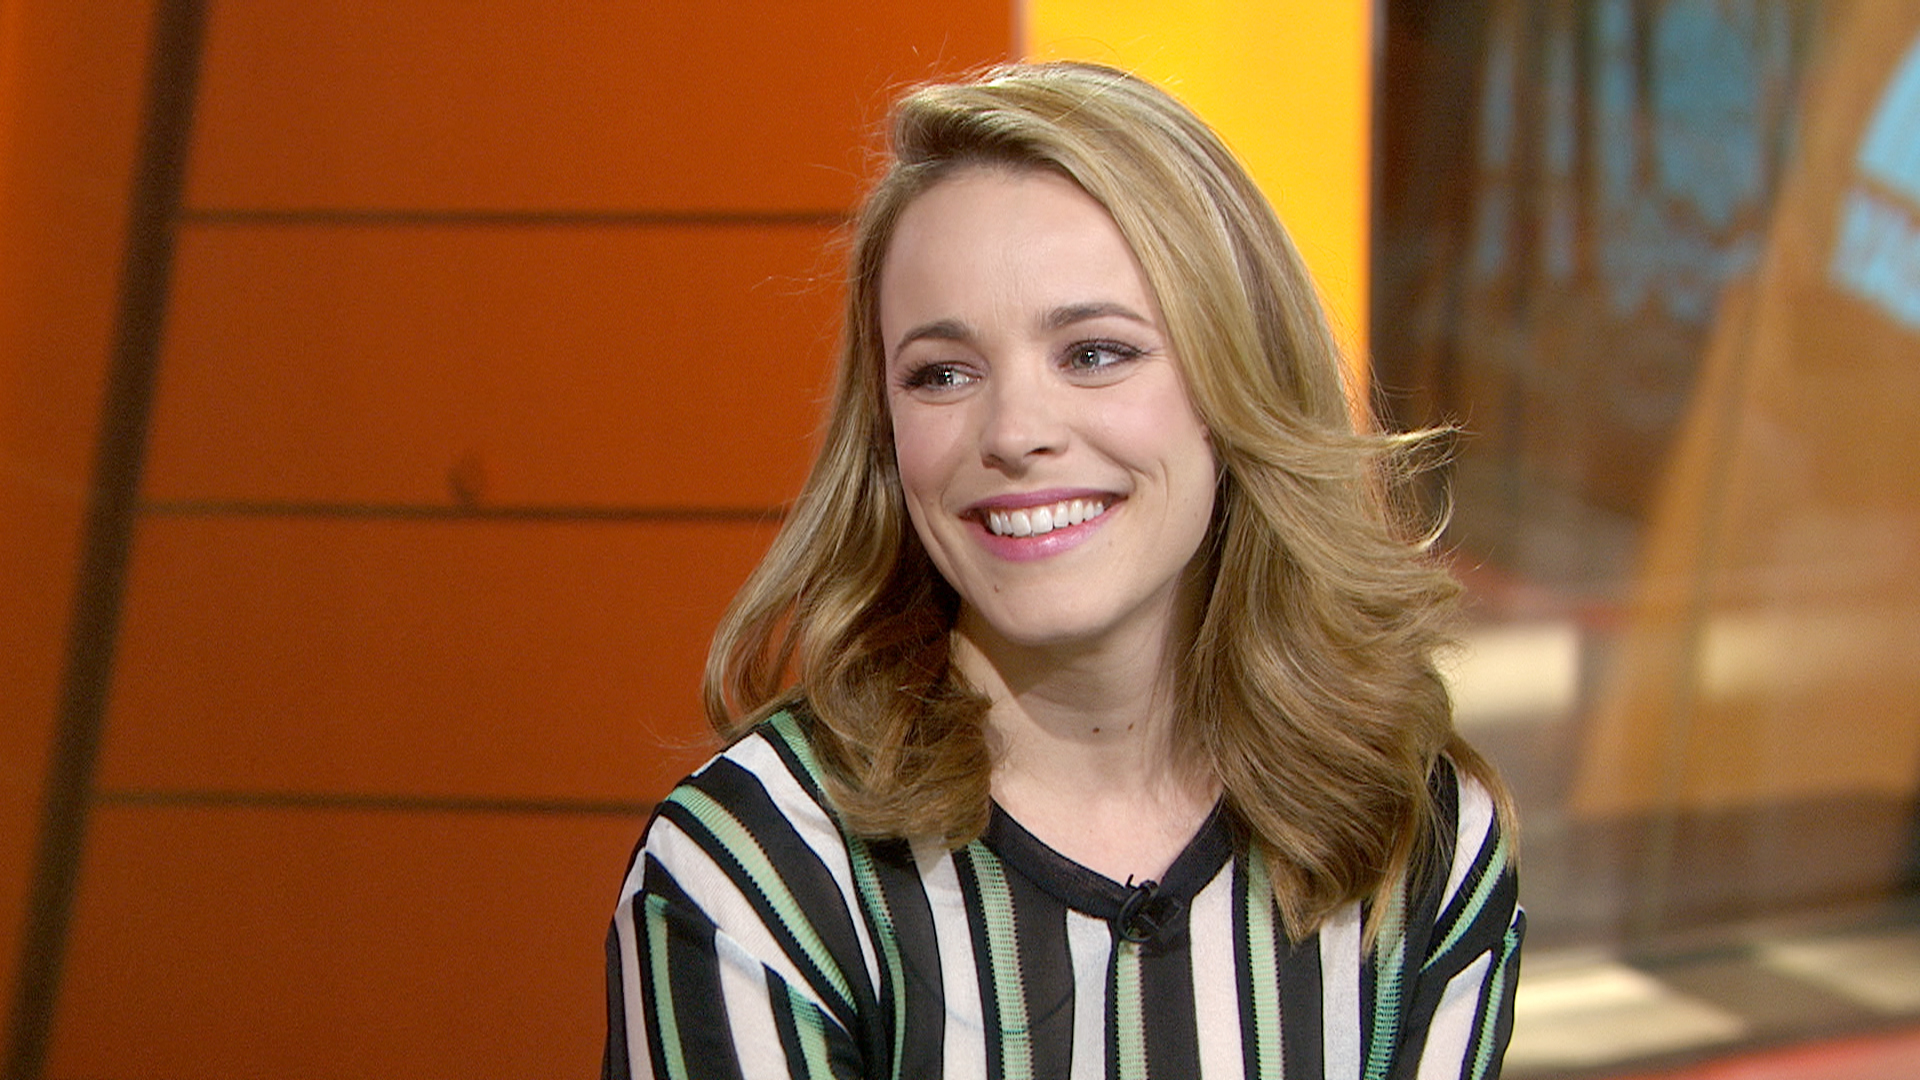 Wallpaper Blink Best of Rachel McAdams Wallpapers HD for Android 